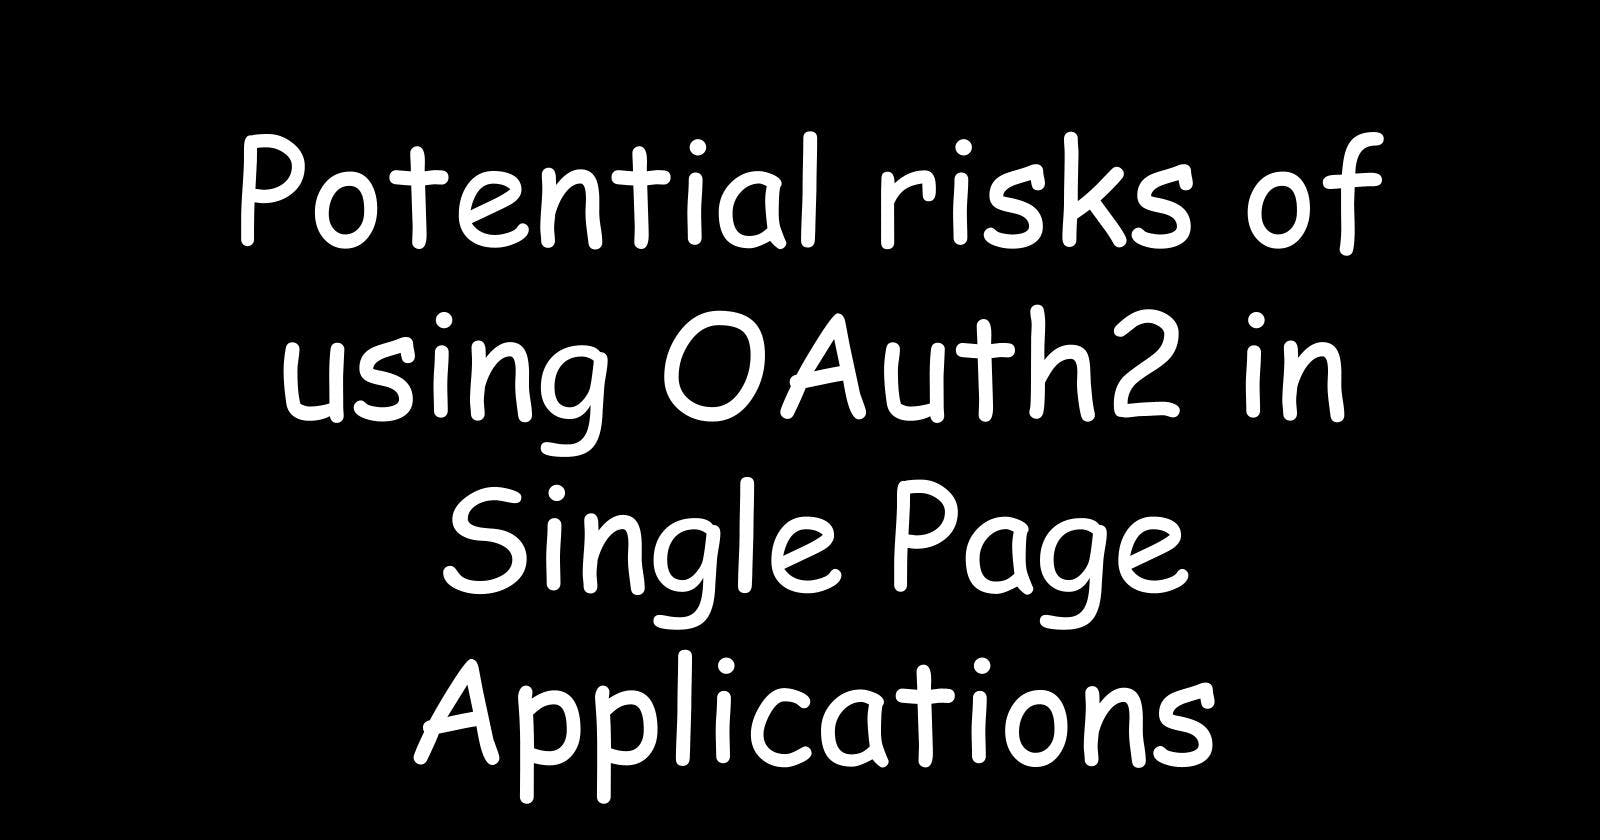 Potential risks of using OAuth2 in Single Page Applications